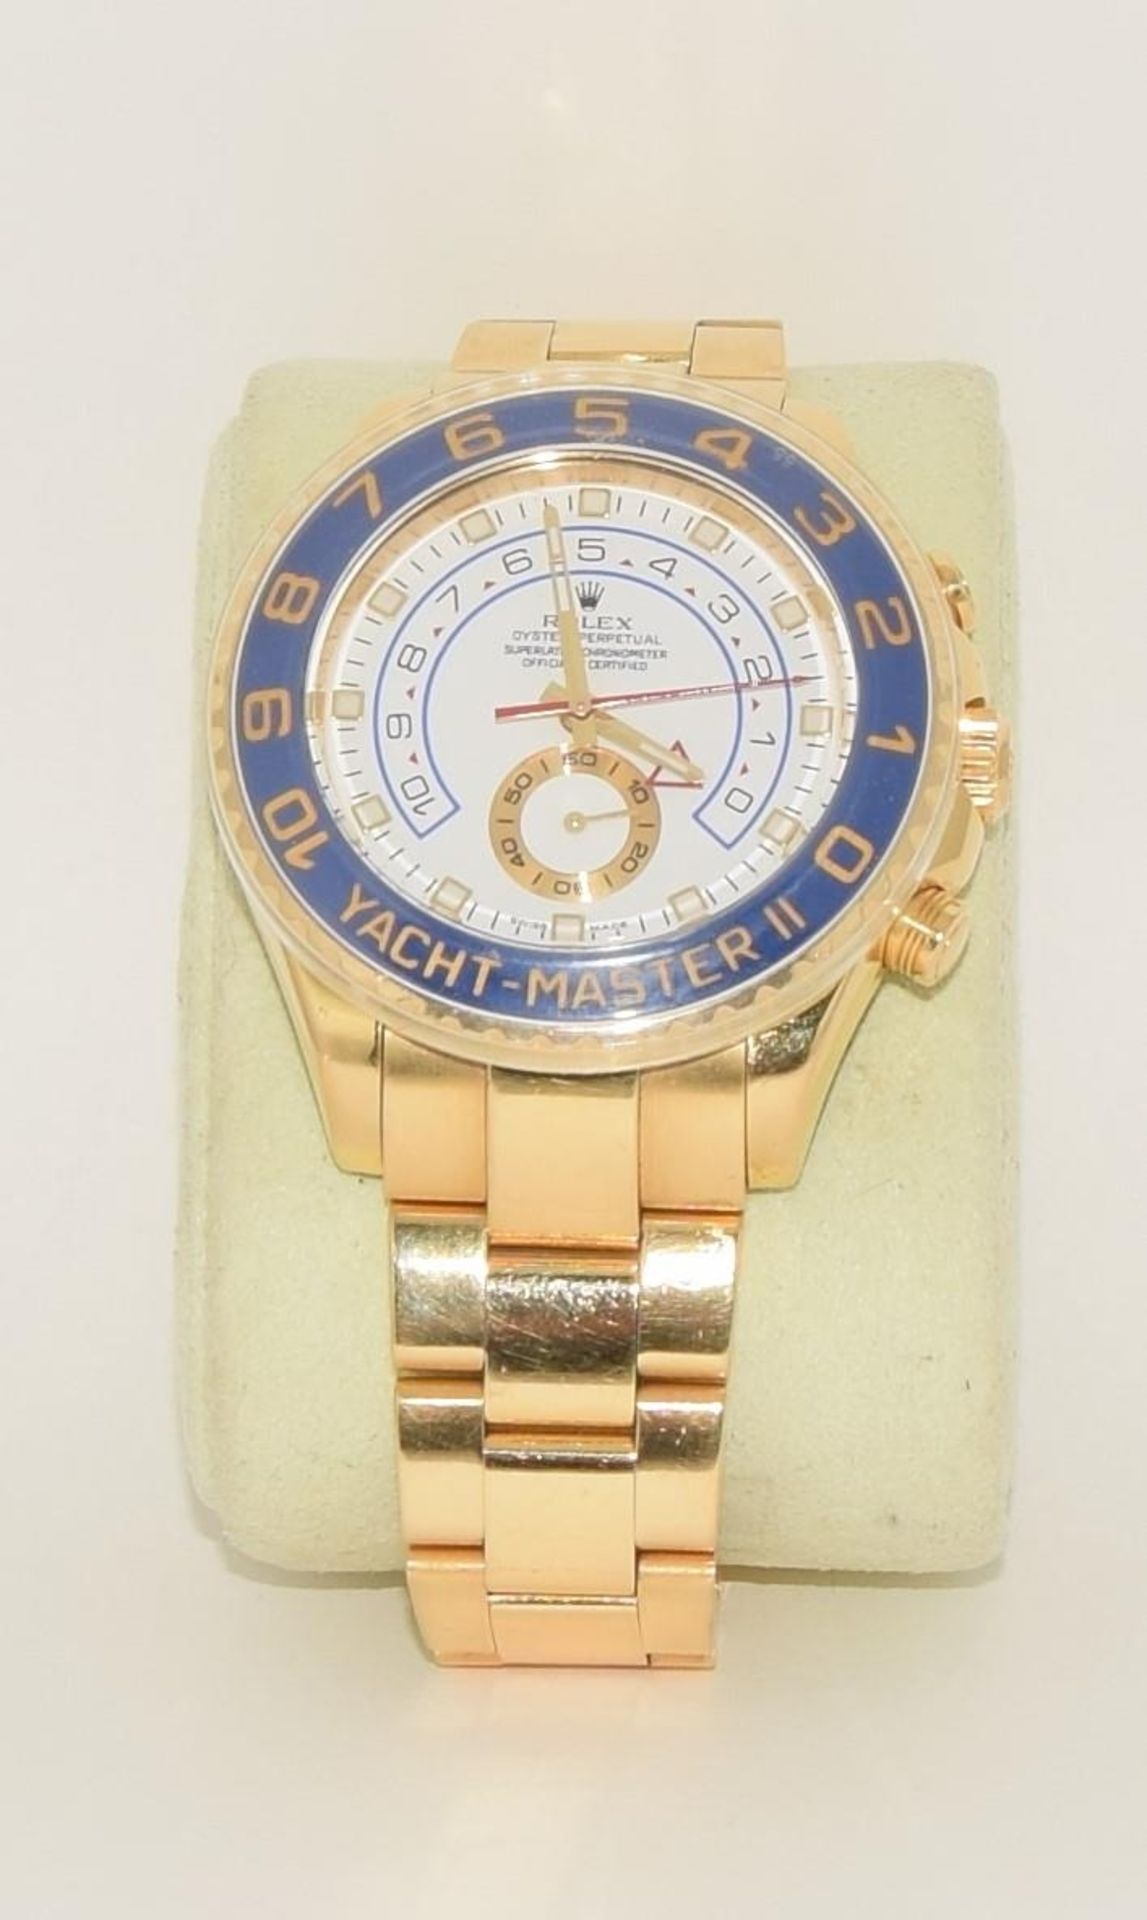 Rolex Yacht Master II, 18ct gold model 116688, Boxed and papers 2012. (ref 30) - Image 2 of 10